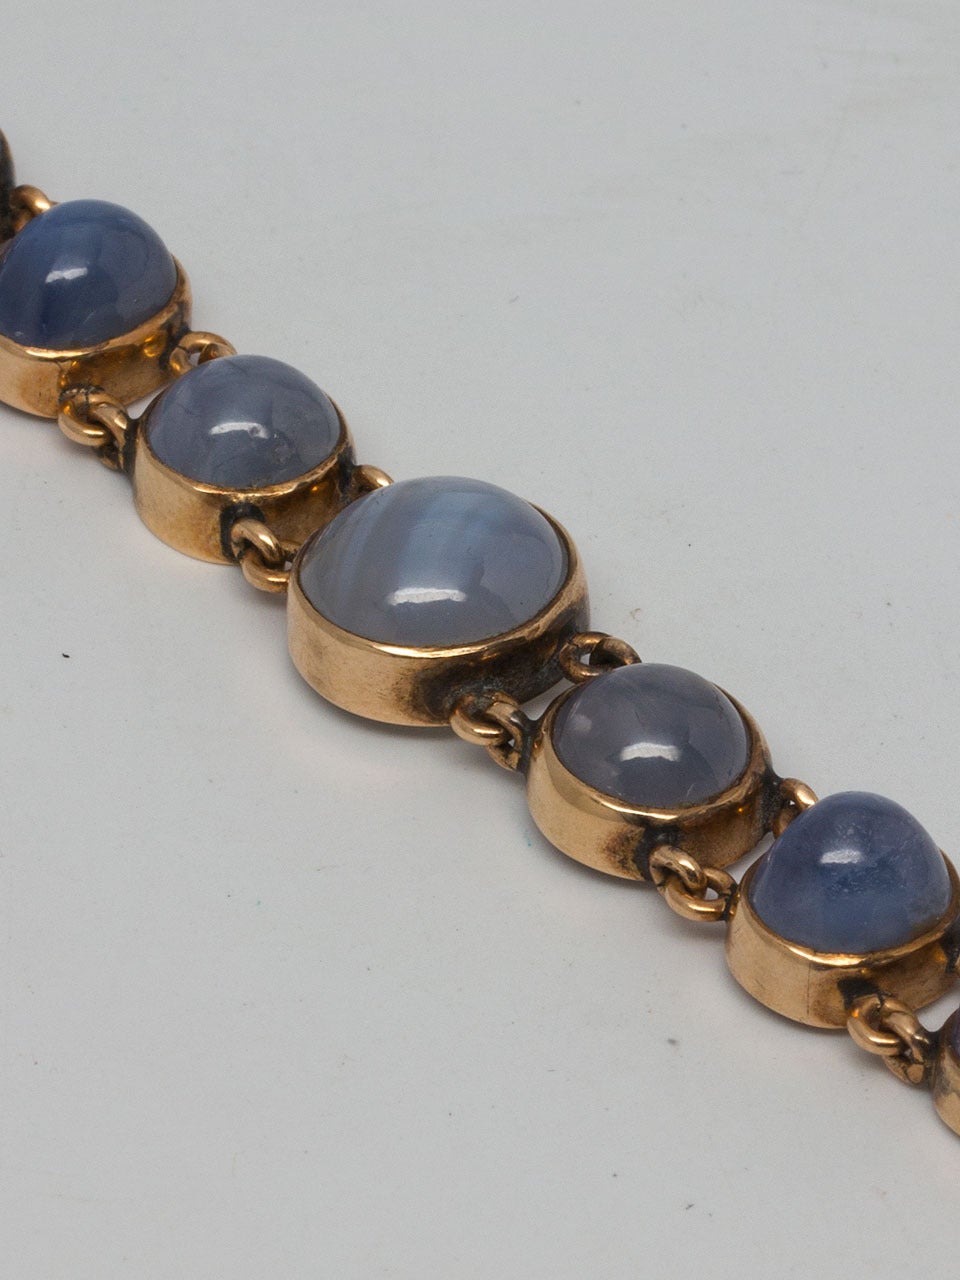 14k yellow gold with 13 bezel set natural blue star sapphires graduating in size from 11 x 11mm down to 8 x 8mm, separated by little jump rings. Very pleasing colors range from light blue to lavender. Very easy to wear & comfortable!  7